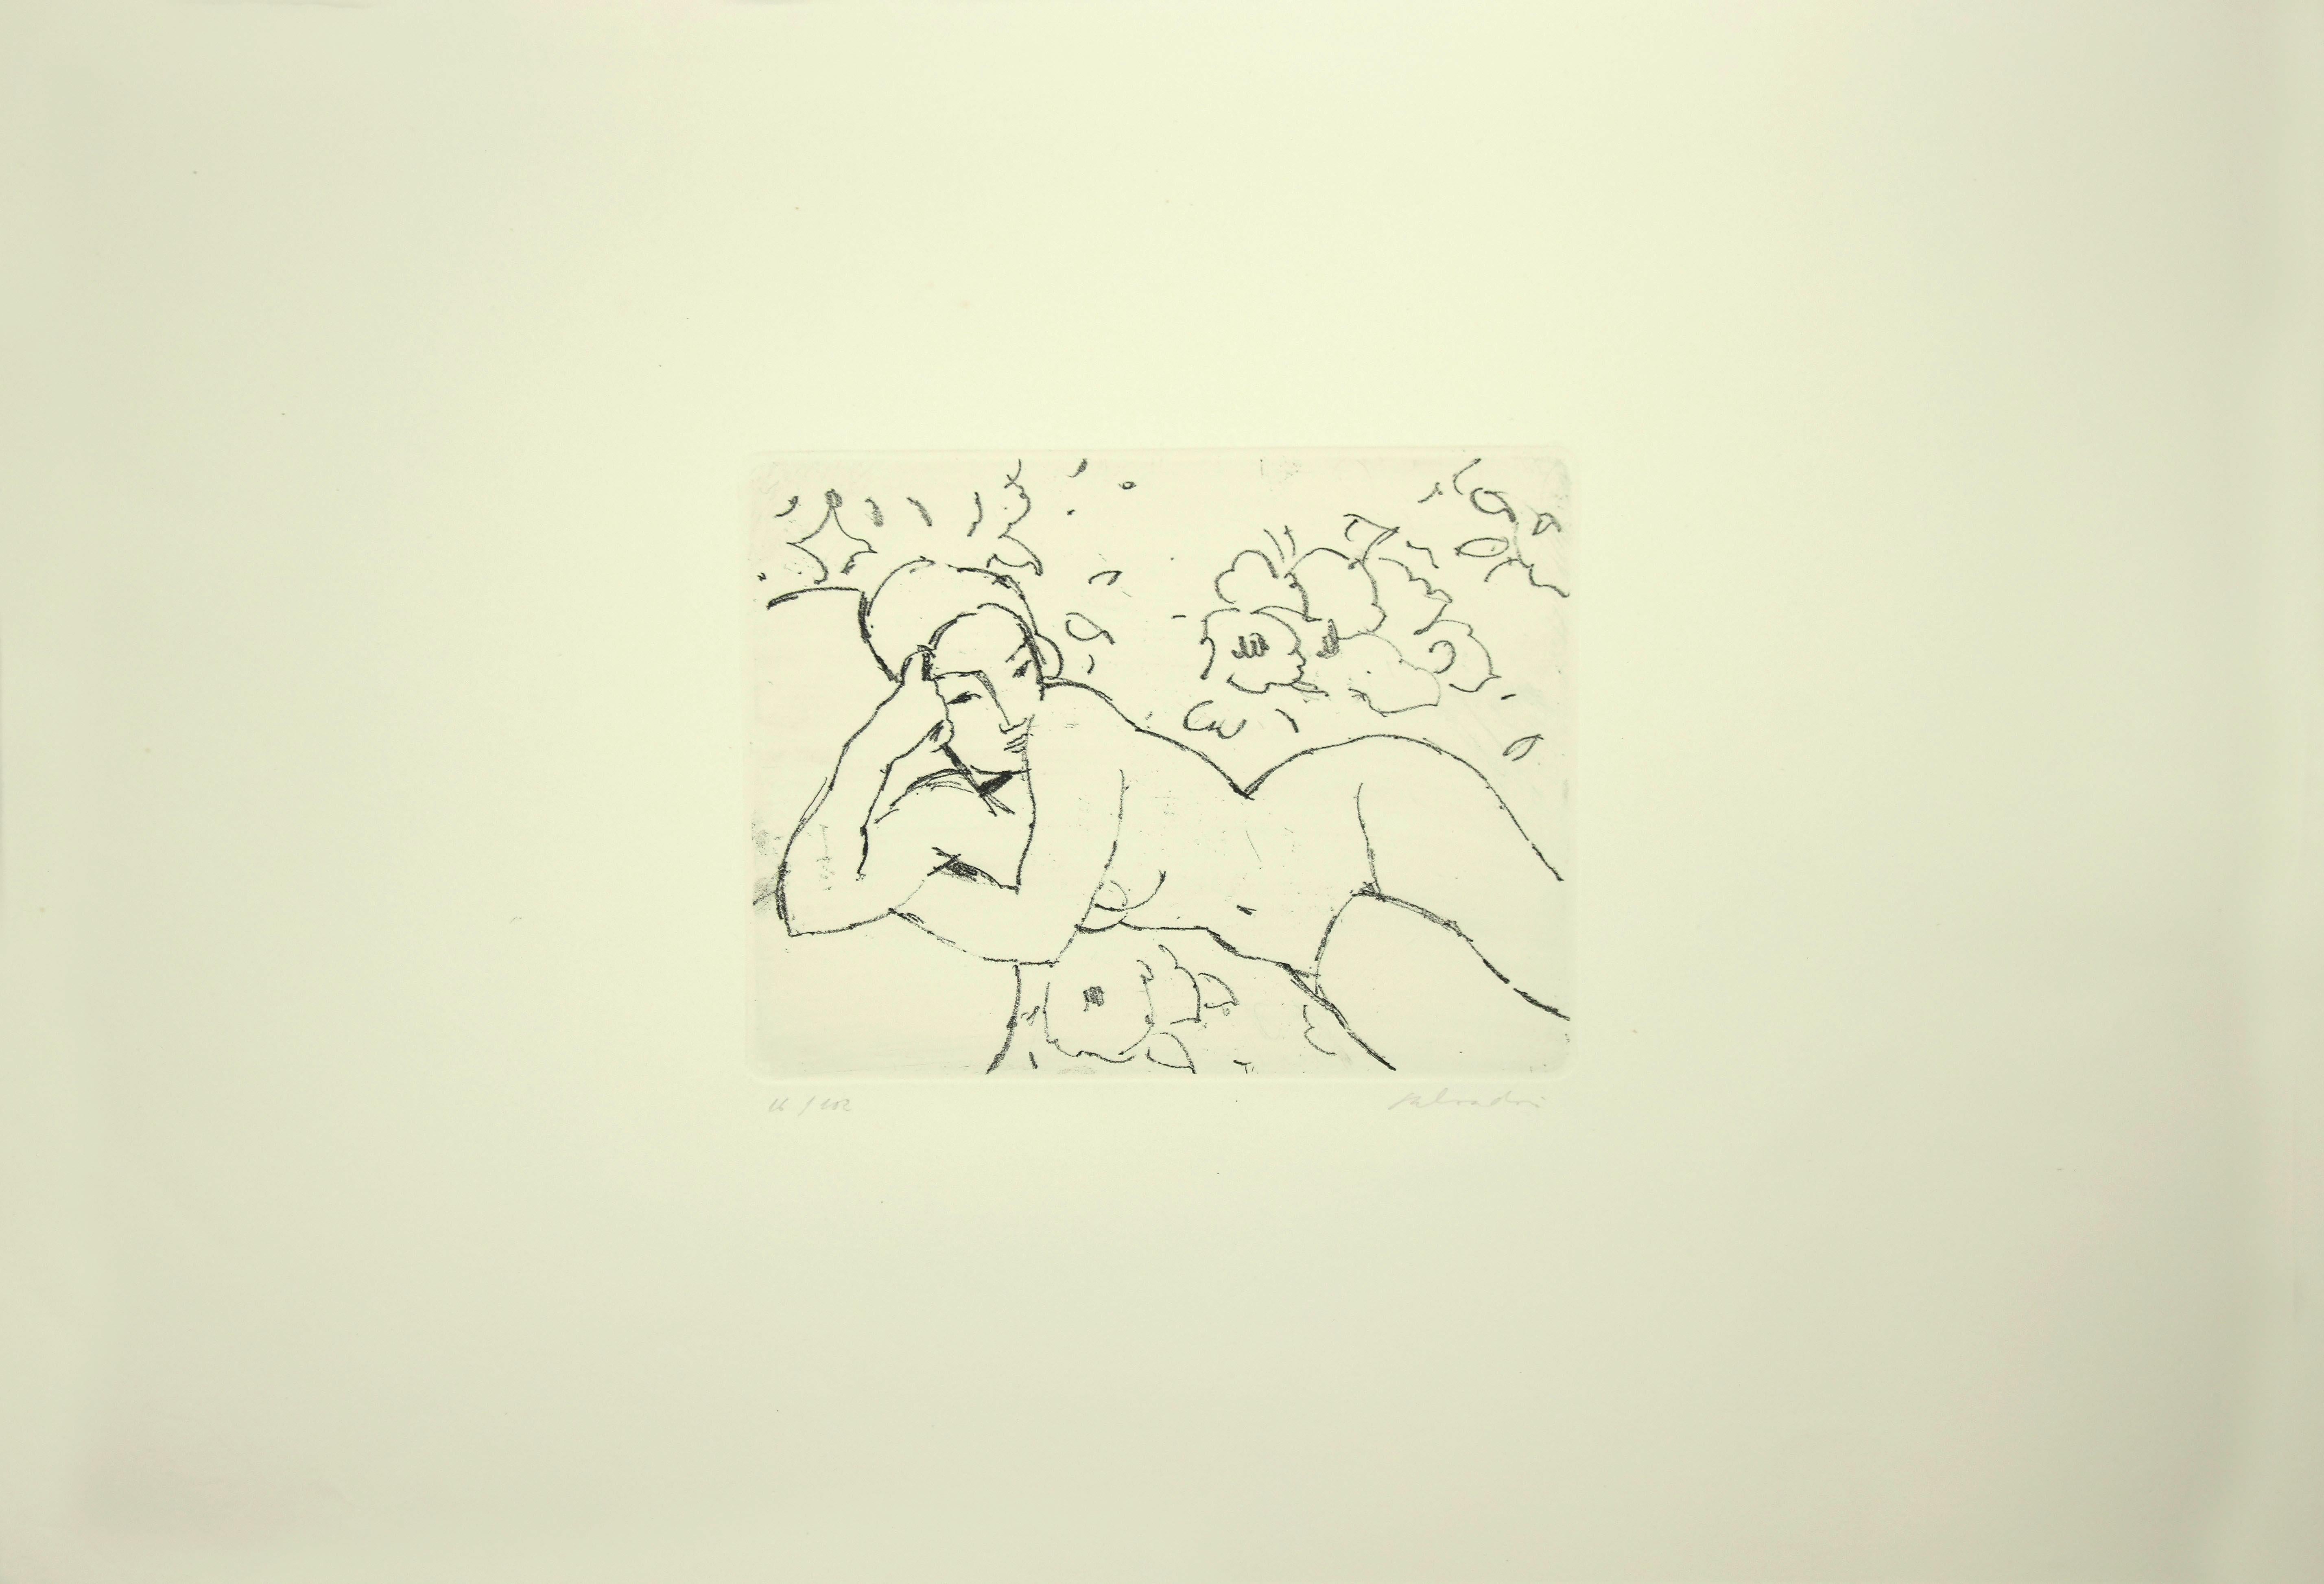 Lying Nude is an original black and white etching realized by Aldo Salvadori in 1964.

Hand signed on the right margin. Numbered on the lower left.

Edition of 102 copies (16/102), etching on copper.

This is one artwork collected in the portfolio